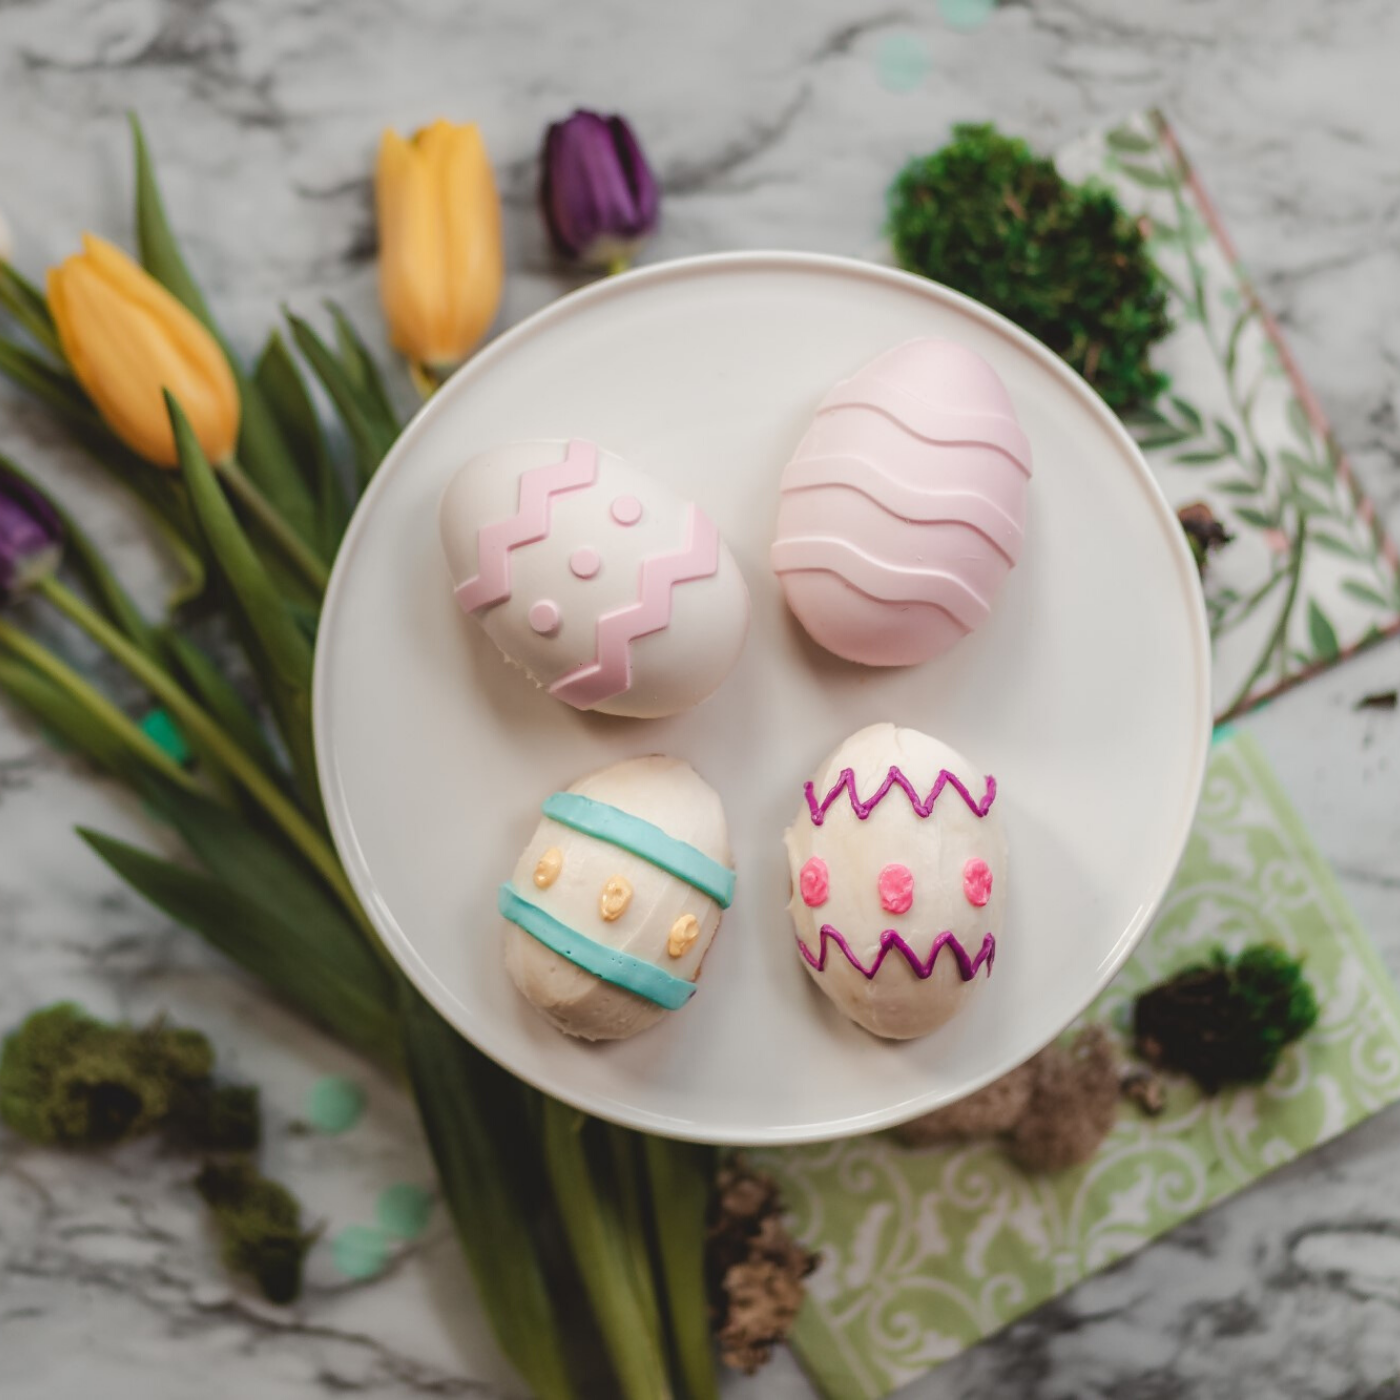 Lifestyle image of 4 decorated spring fling egg cupcakes 